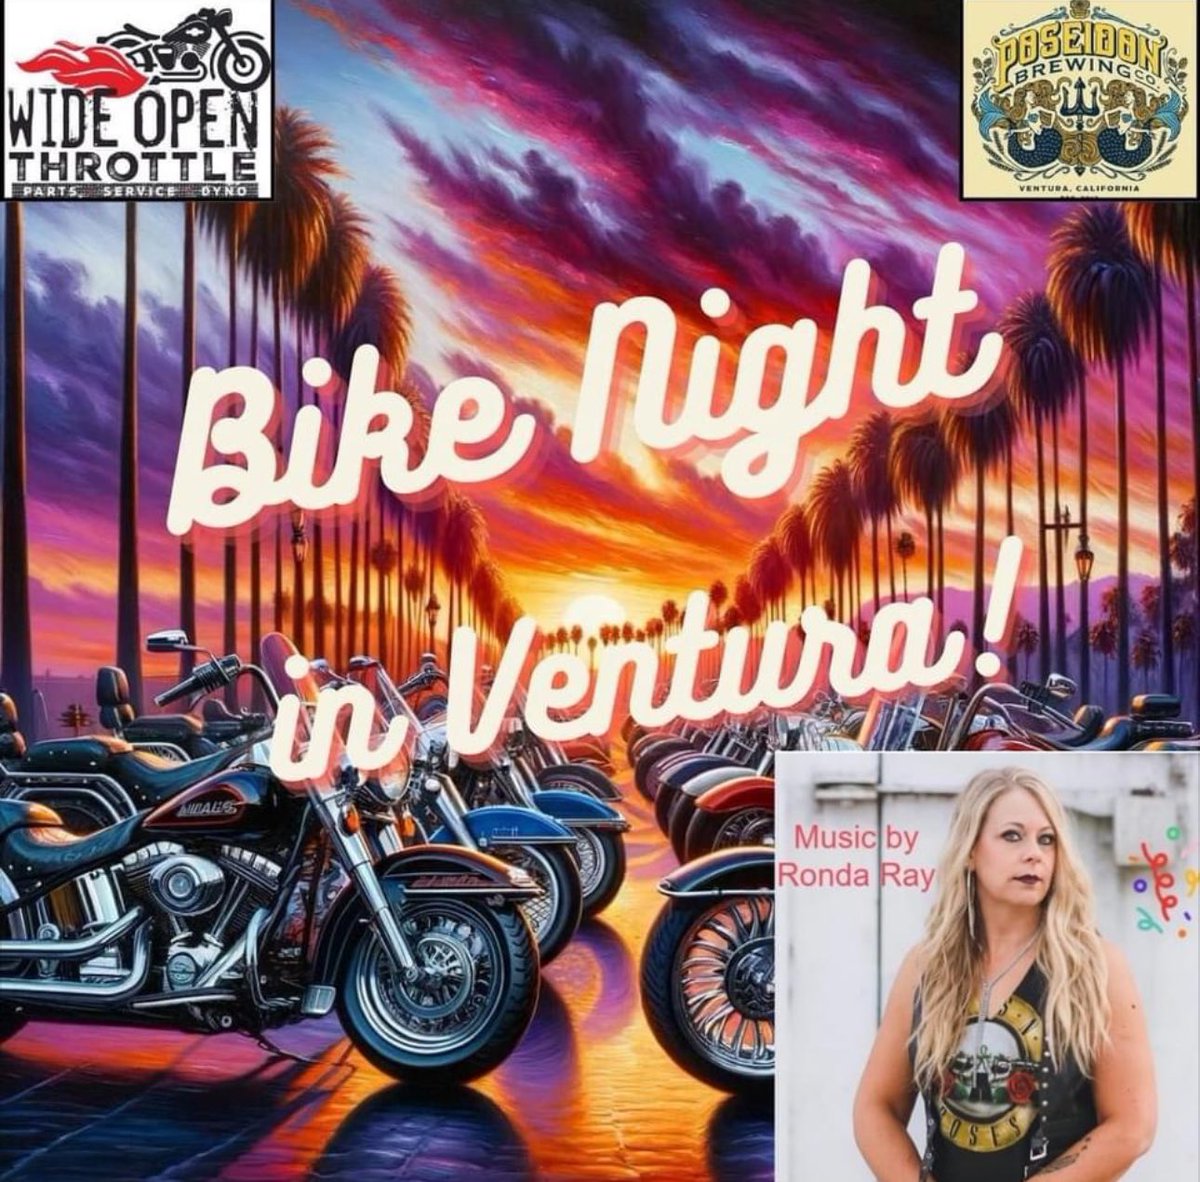 Bike night is back at Poseidon Brewing Co in Ventura, CA May 24 at 6pm! Hosted by veteran owned, Wide Open Throttle. Food truck by Woodstock Farina Pizza. Live music by award winning rock artist, Ronda Ray. Bring your friends, rev your engines and let’s have a great time!